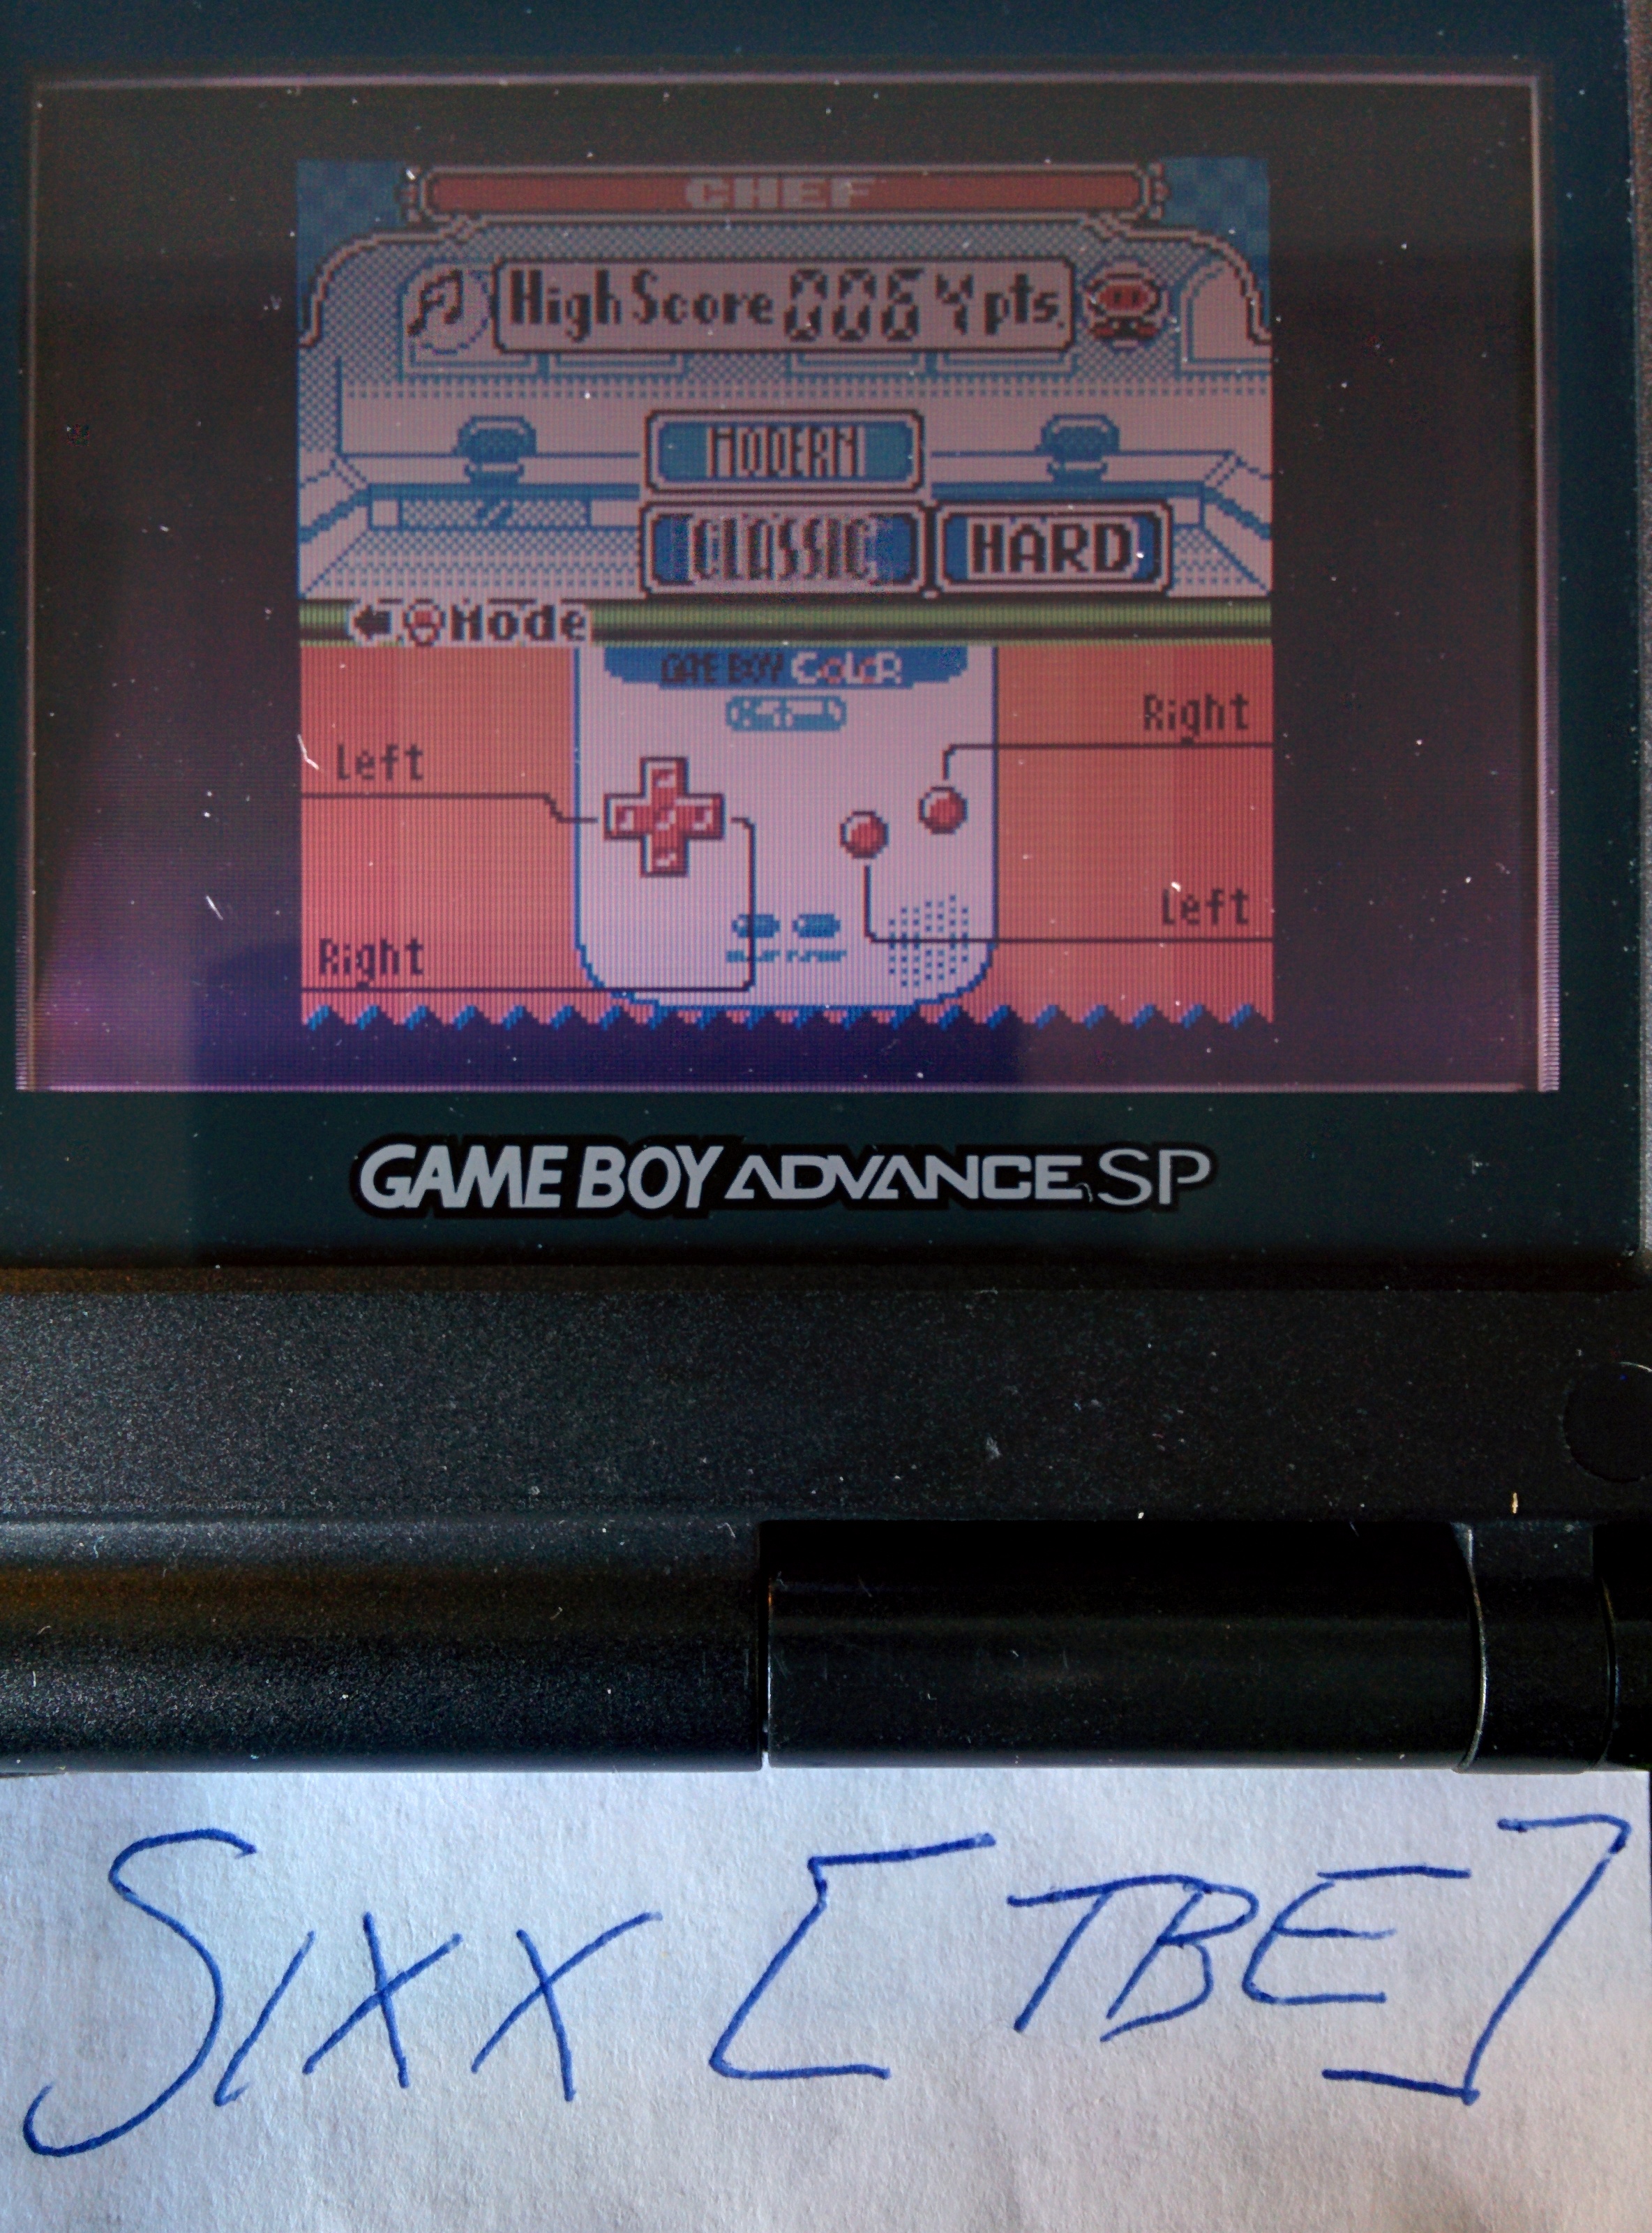 Sixx: Game & Watch Gallery 2: Chef: Classic: Hard (Game Boy Color) 64 points on 2014-08-29 04:10:33